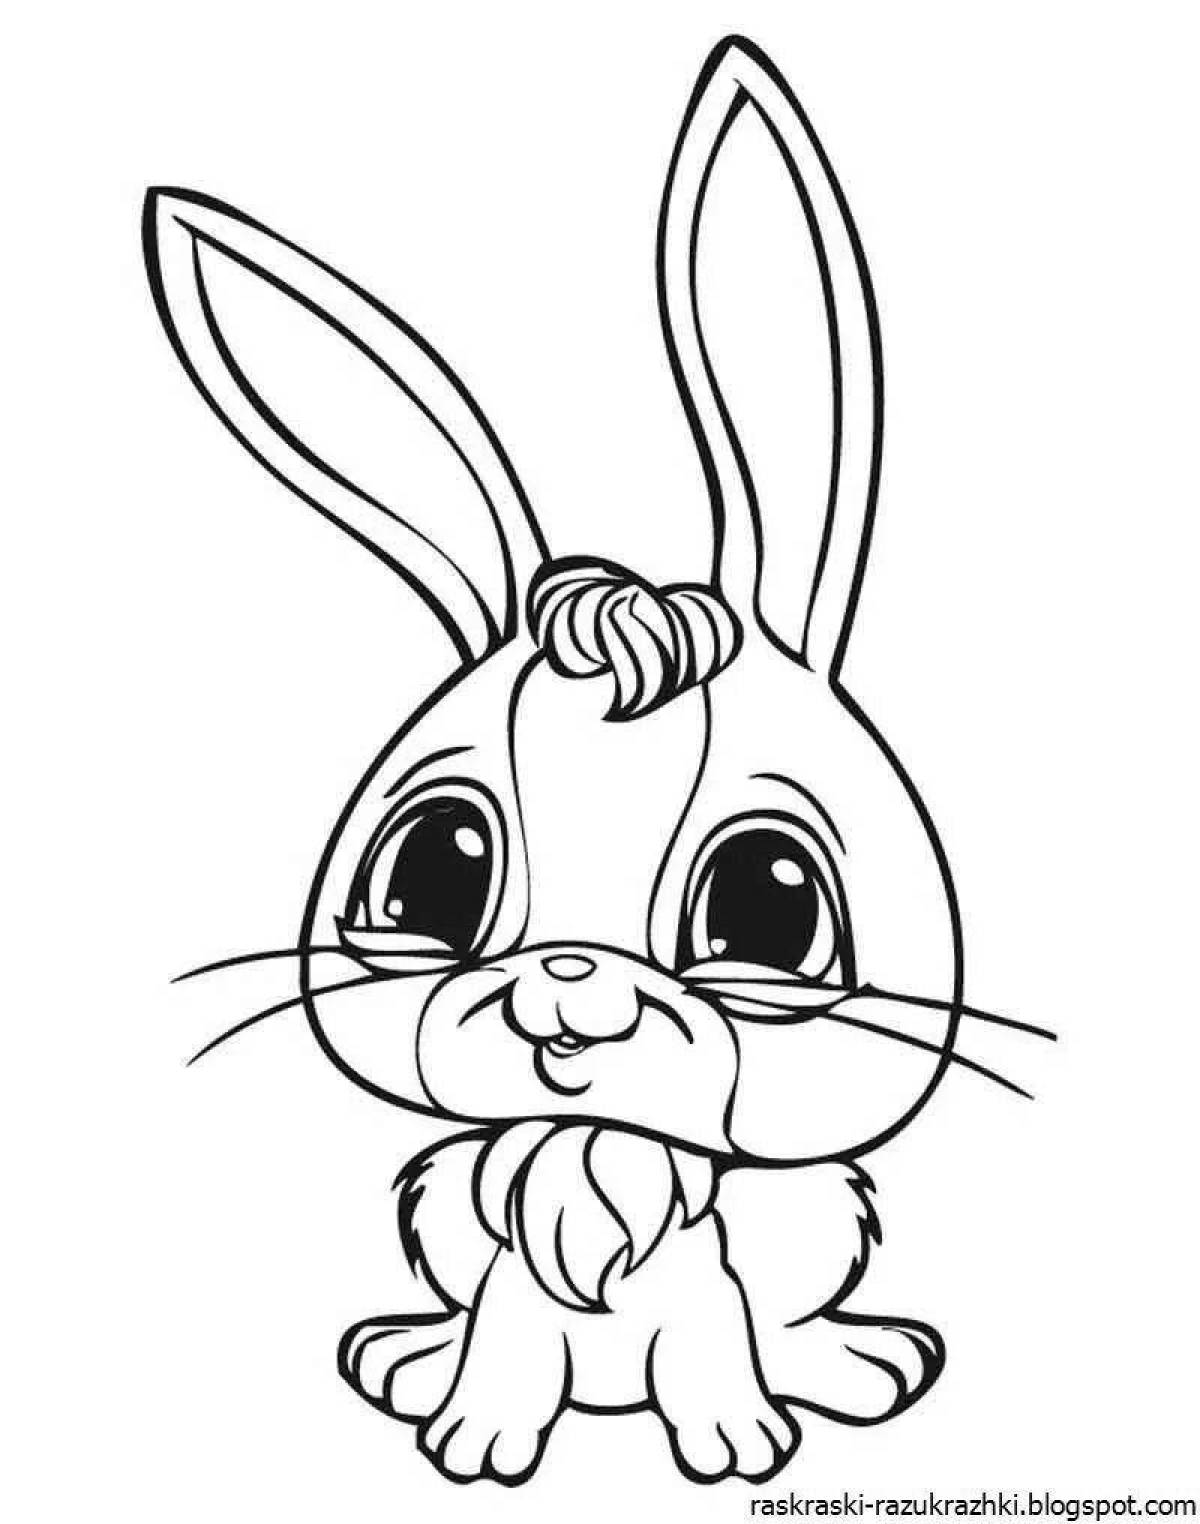 Colorful nice bunny coloring page